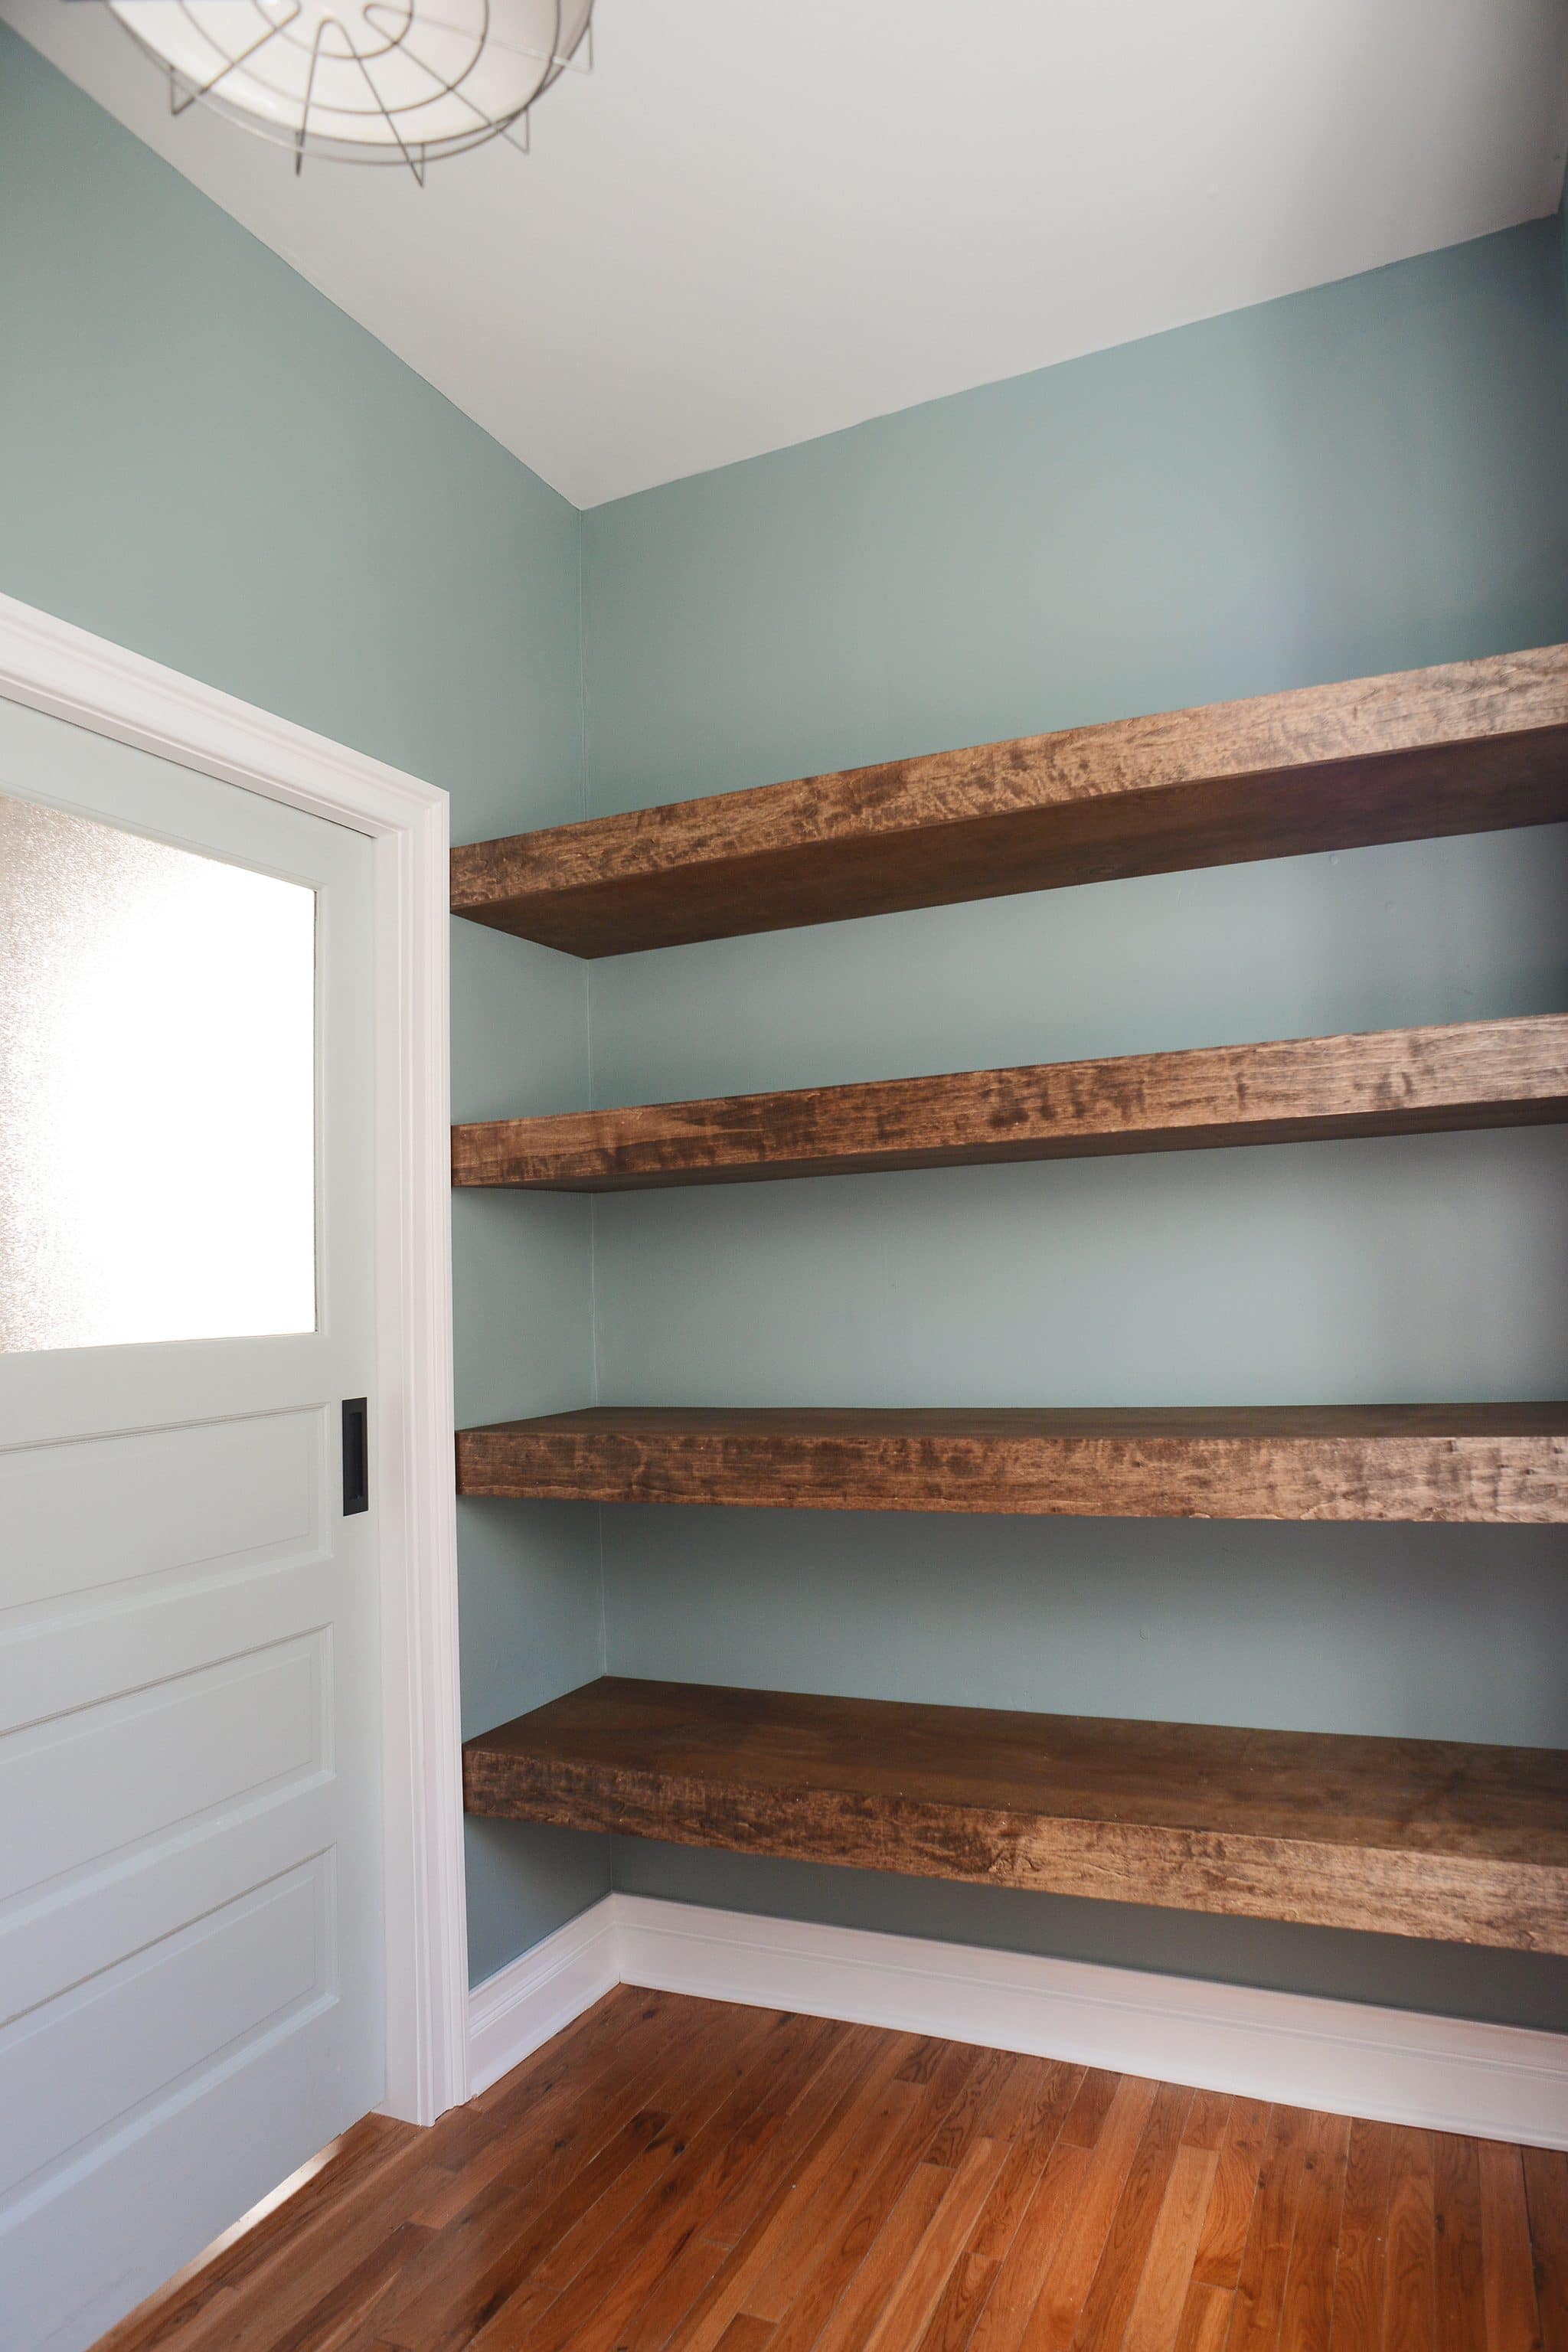 Diy Floating Shelves For Easy Storage, How To Build Floating Wall Shelves